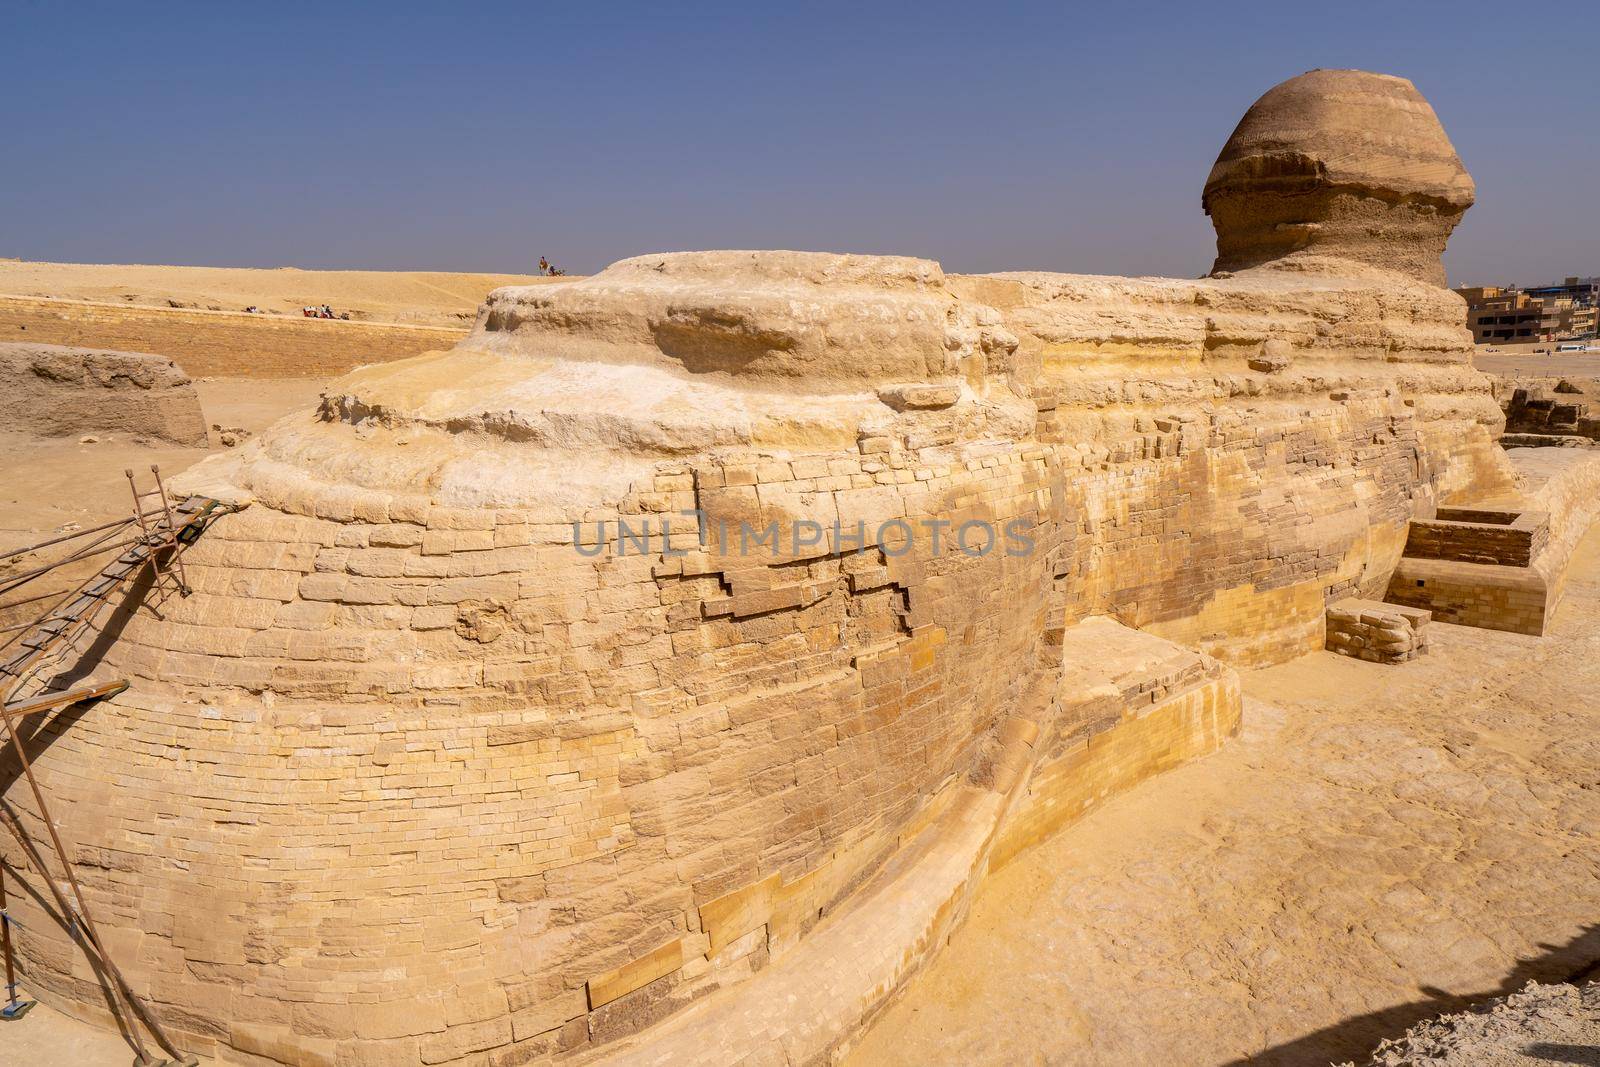 Great Sphinx of Giza from back side. Unusual view point